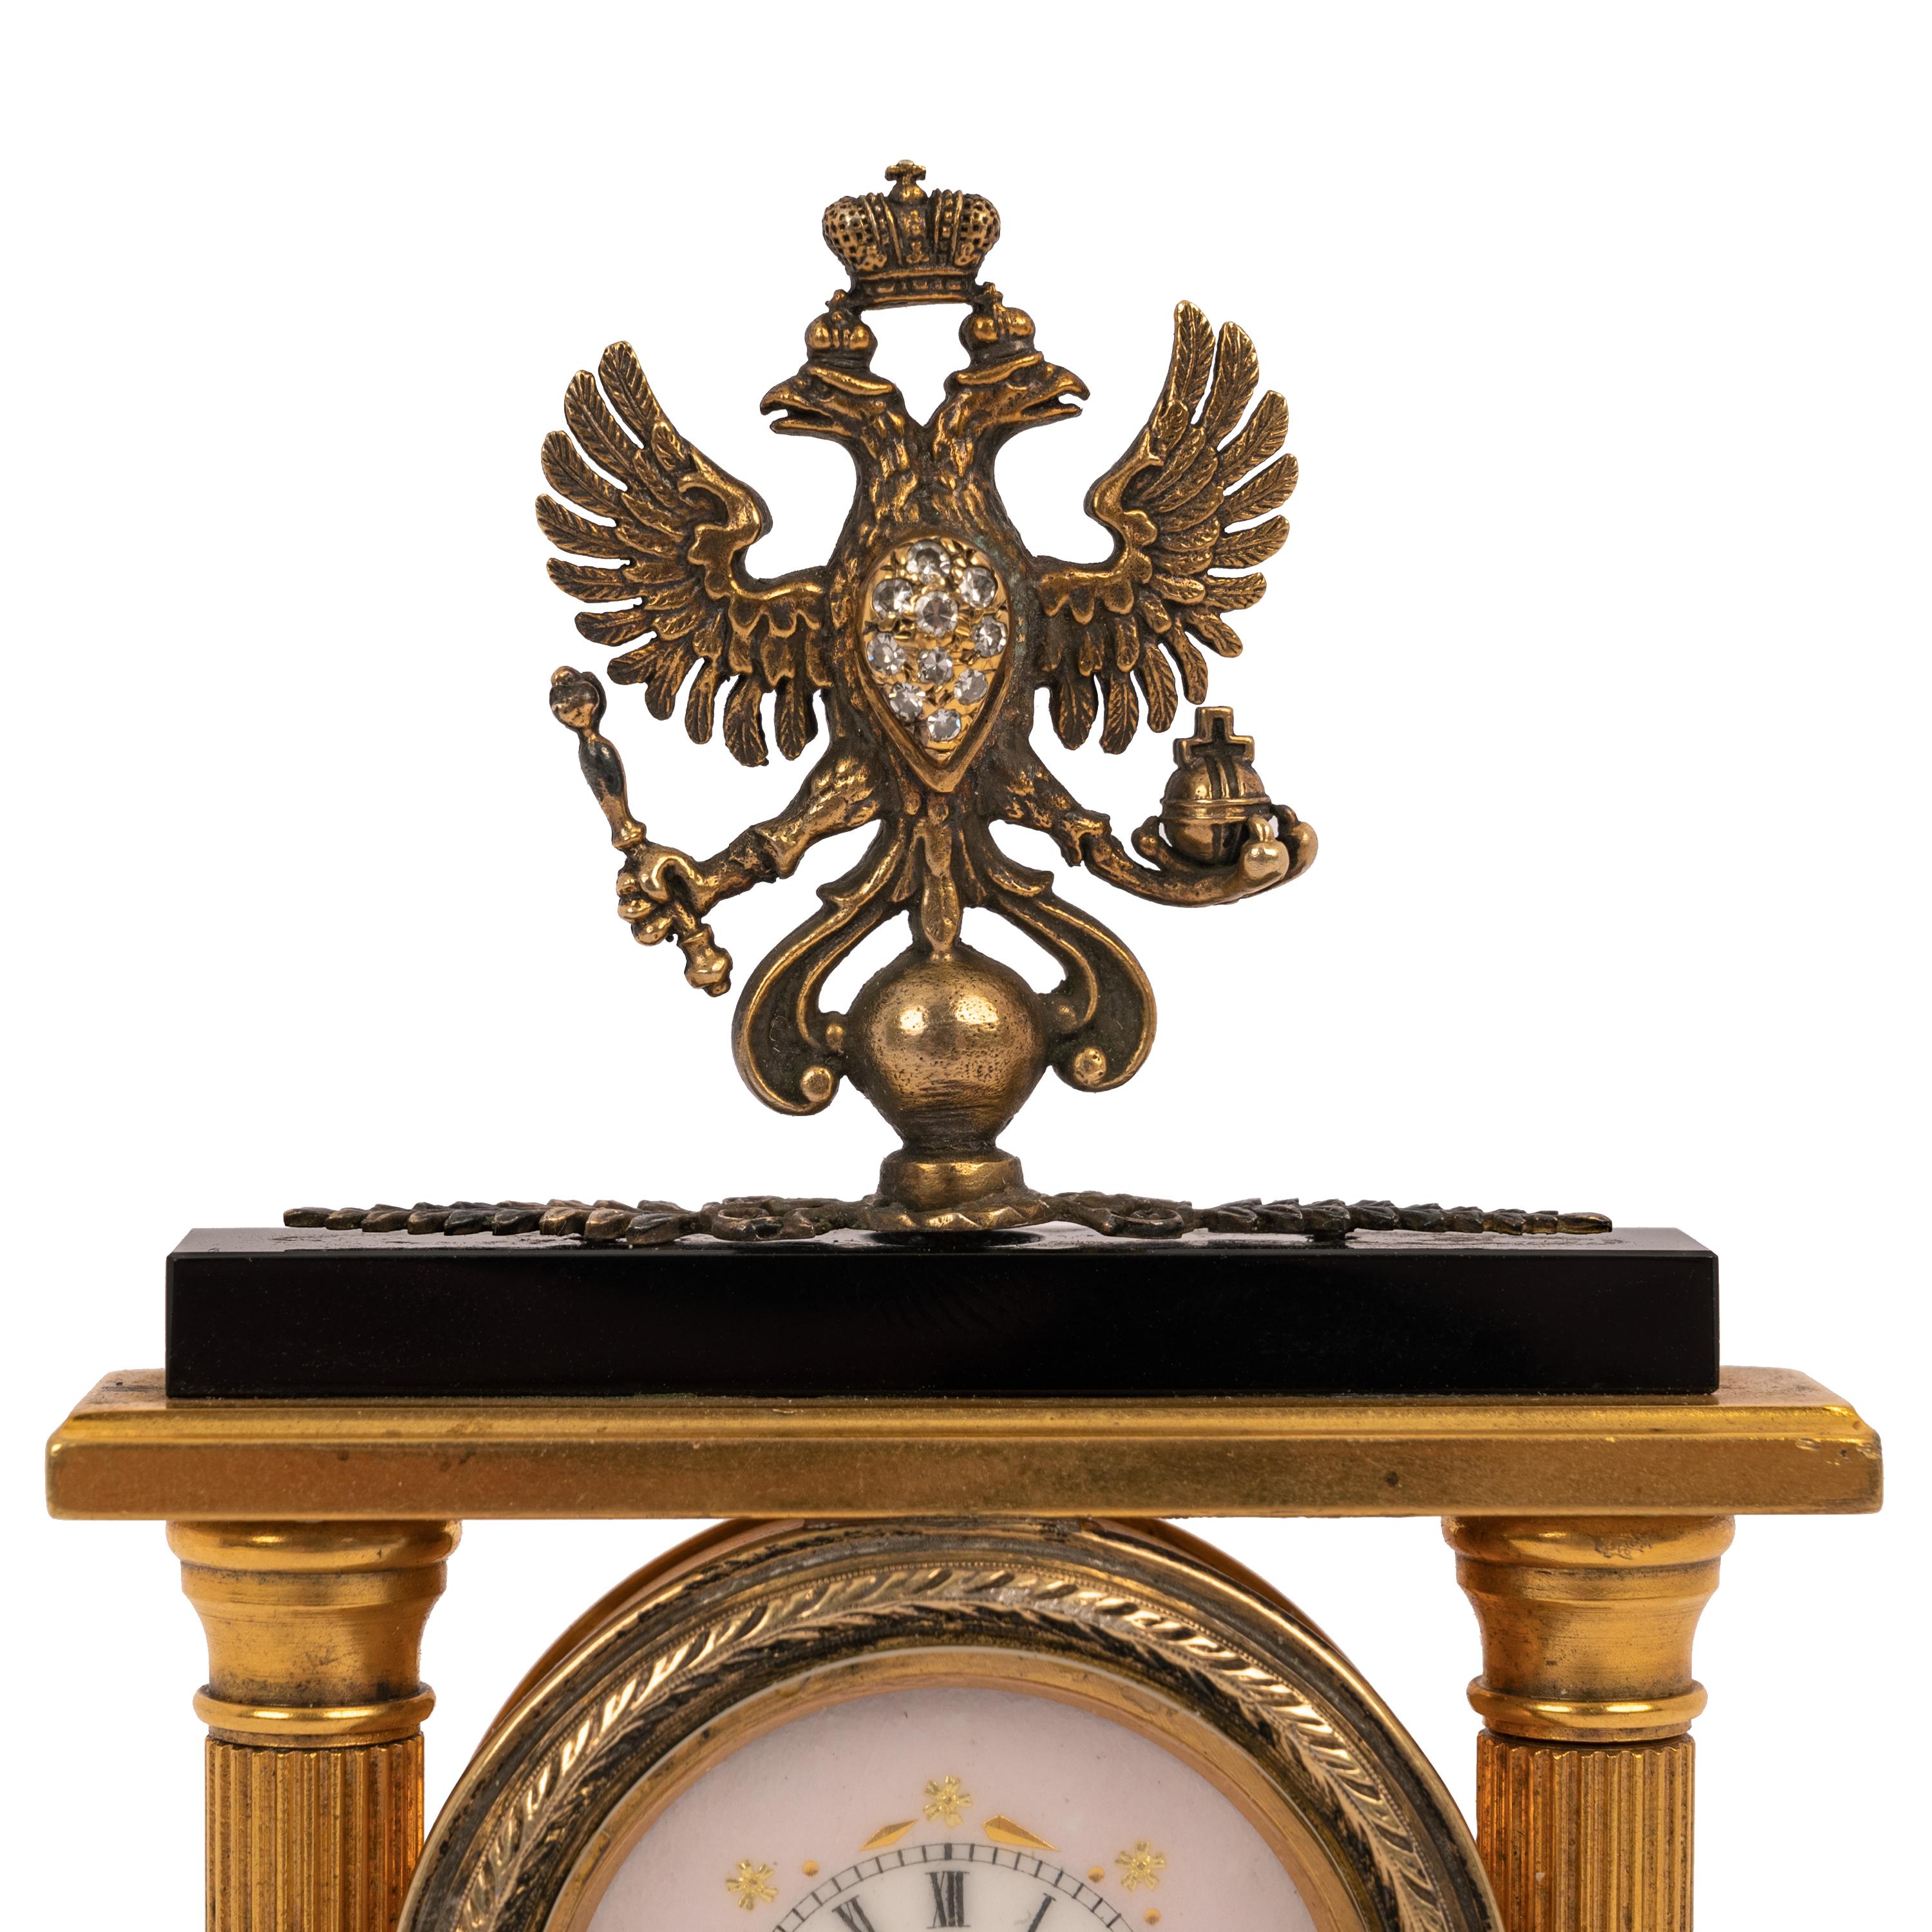 Important antique Russian Imperial Faberge silver gilt chalcedony (black onyx) diamond miniature desk clock, by workmaster Feodor Afanassiev (1870-1927), the clock circa 1900.
In 1883 Afanasiev moved to St Petersburg and was apprenticed in the